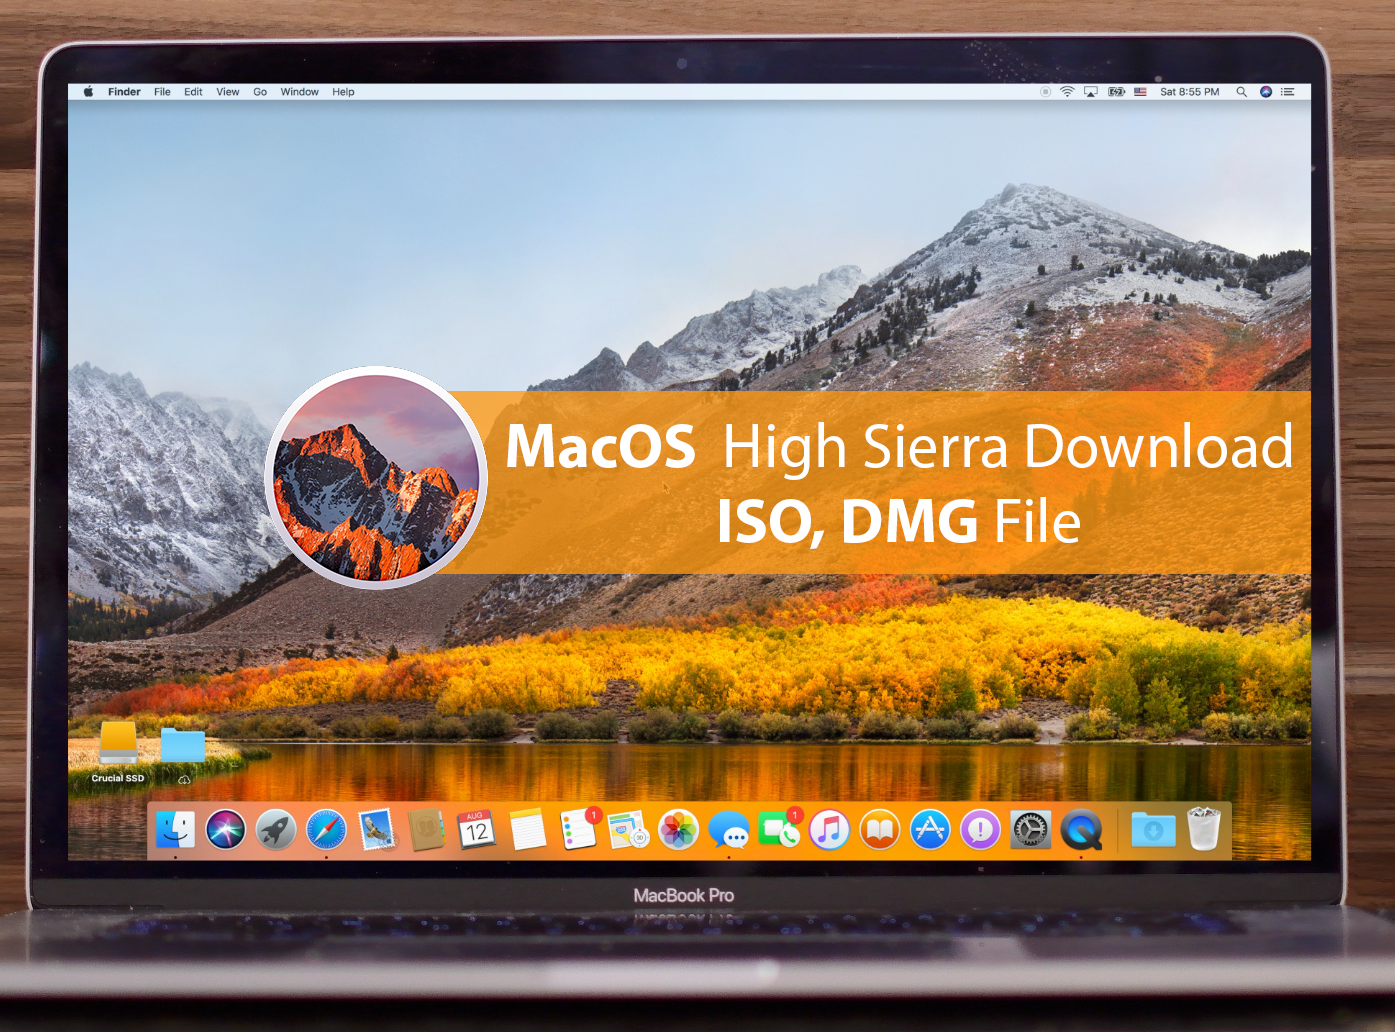 macos high sierra system requirements